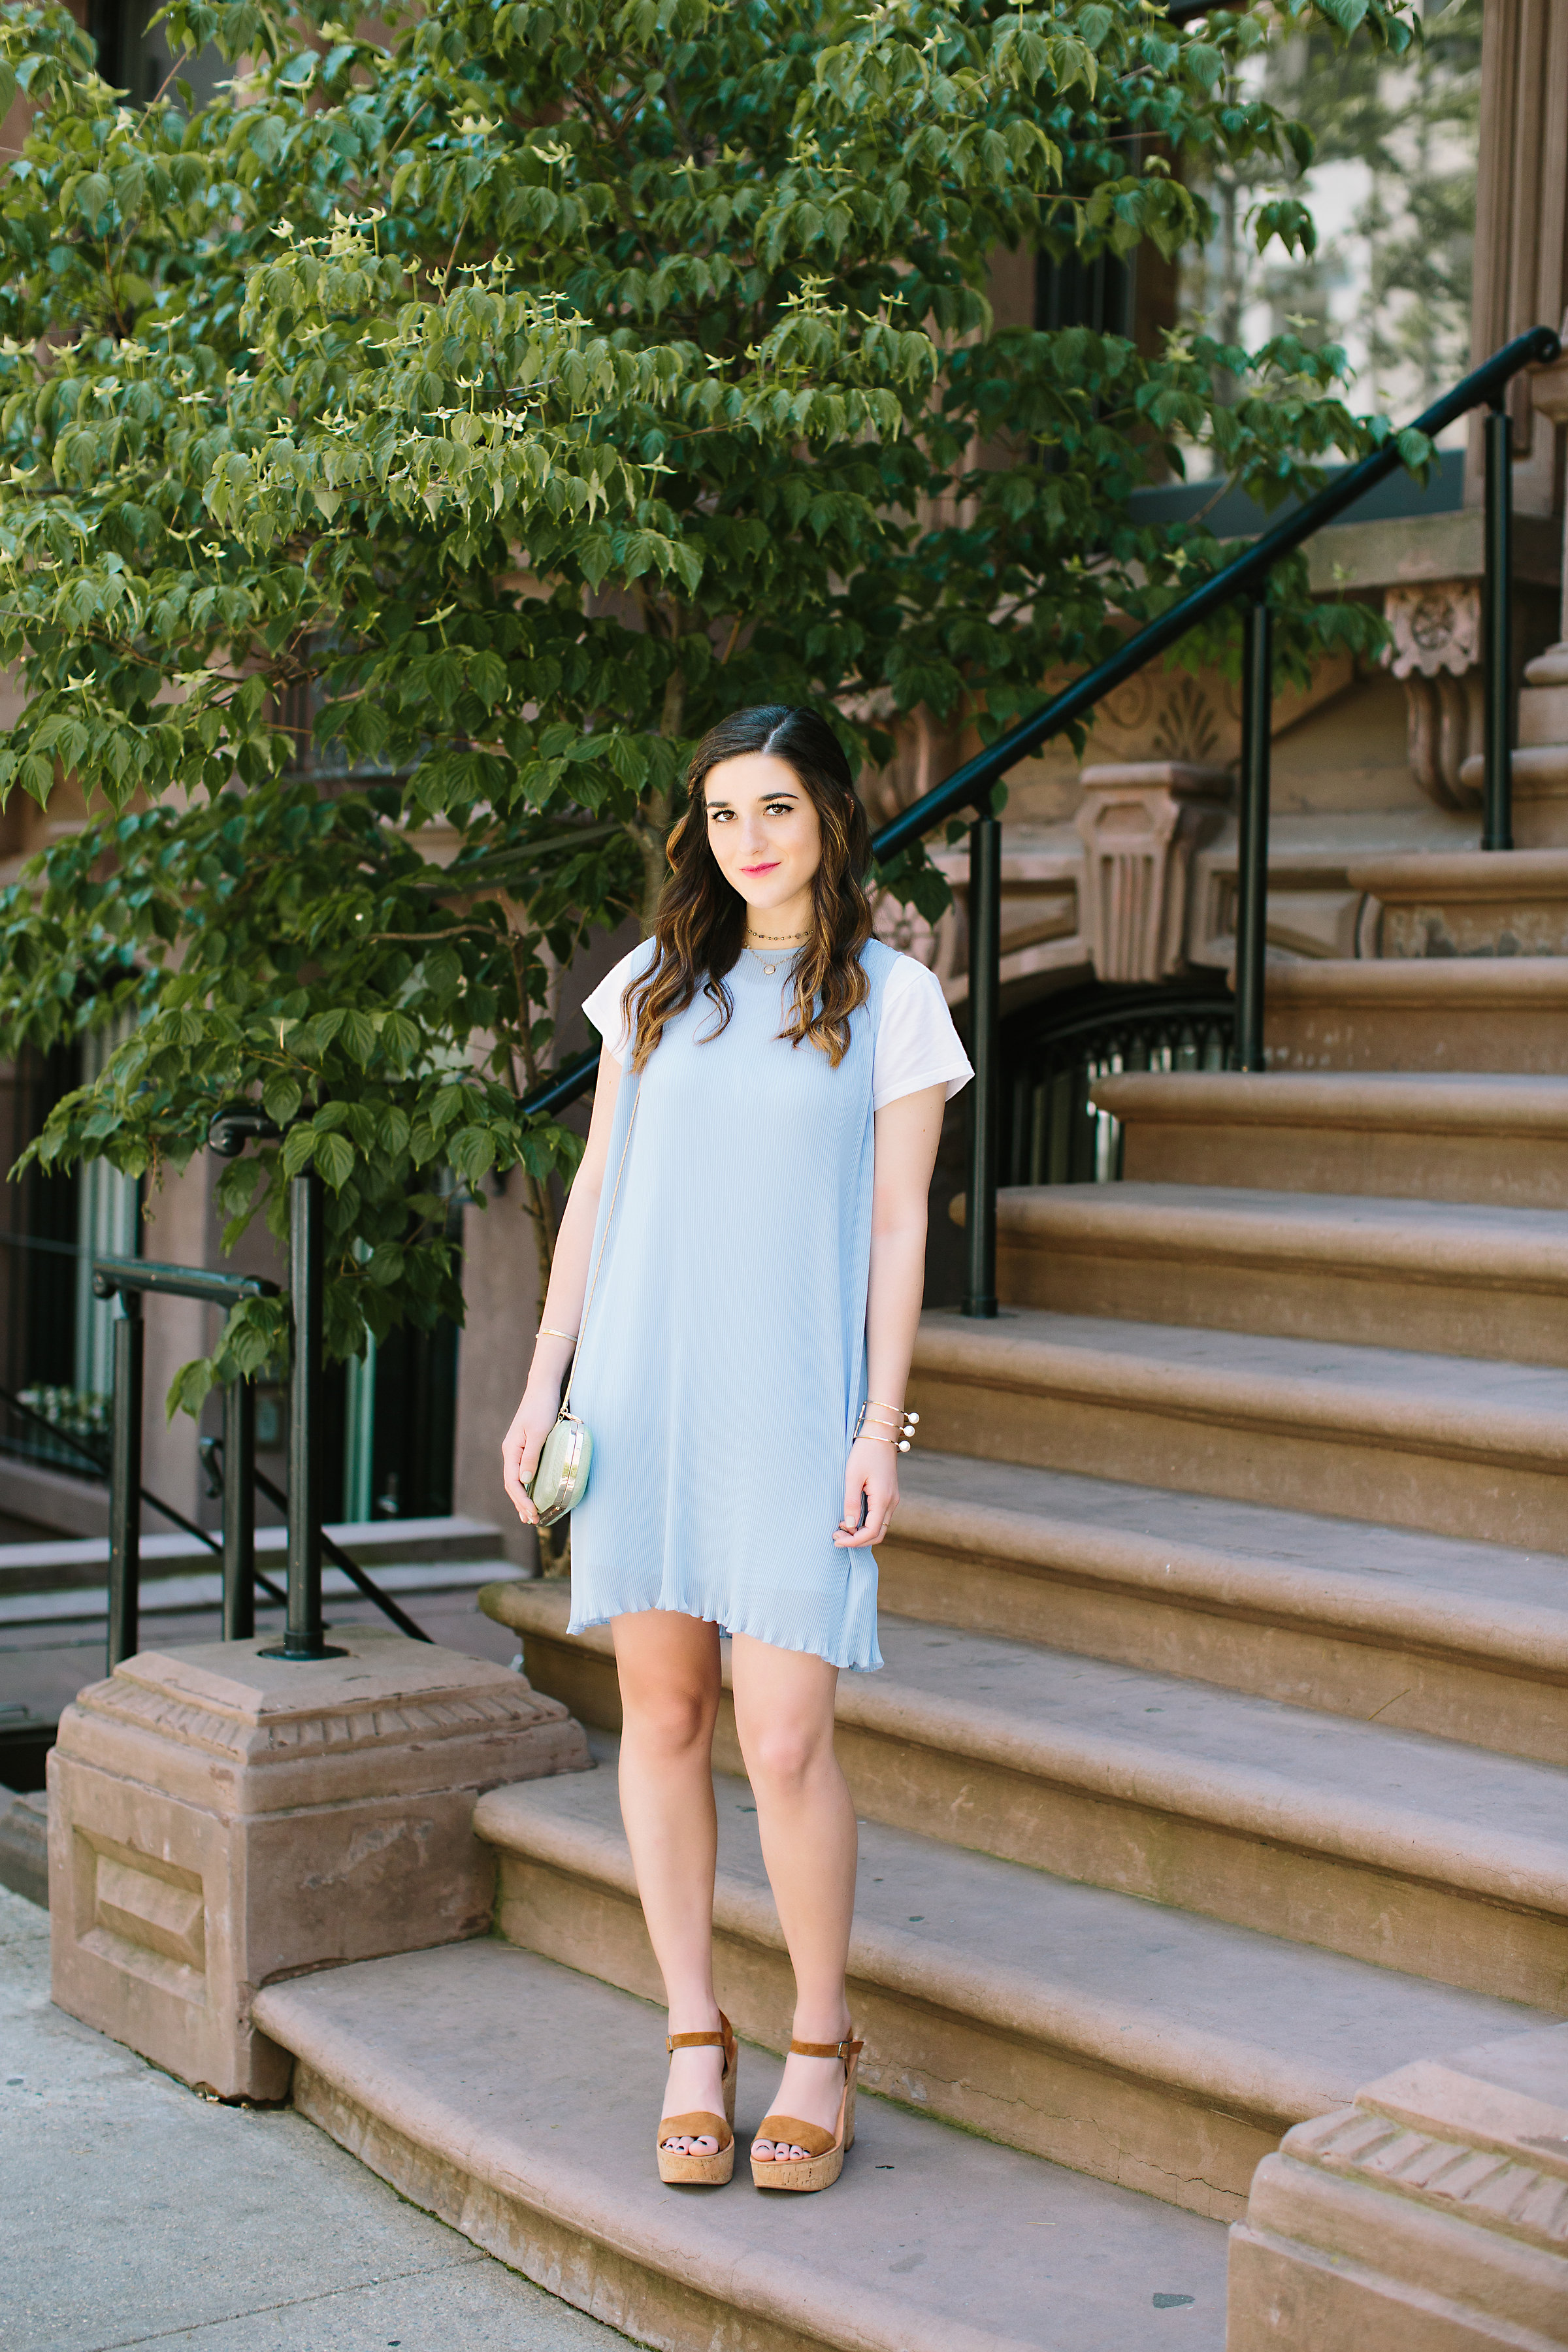 Pastel Blue Pleated Dress Keepsake The Label Louboutins & Love Fashion Blog Esther Santer NYC Street Style Blogger Outfit OOTD Pretty Photoshoot Upper East Side Dolce Vita Wedges Club Monaco Clutch Gold Jewelry Women White Tee Shirt Inspo Summer Look.jpg